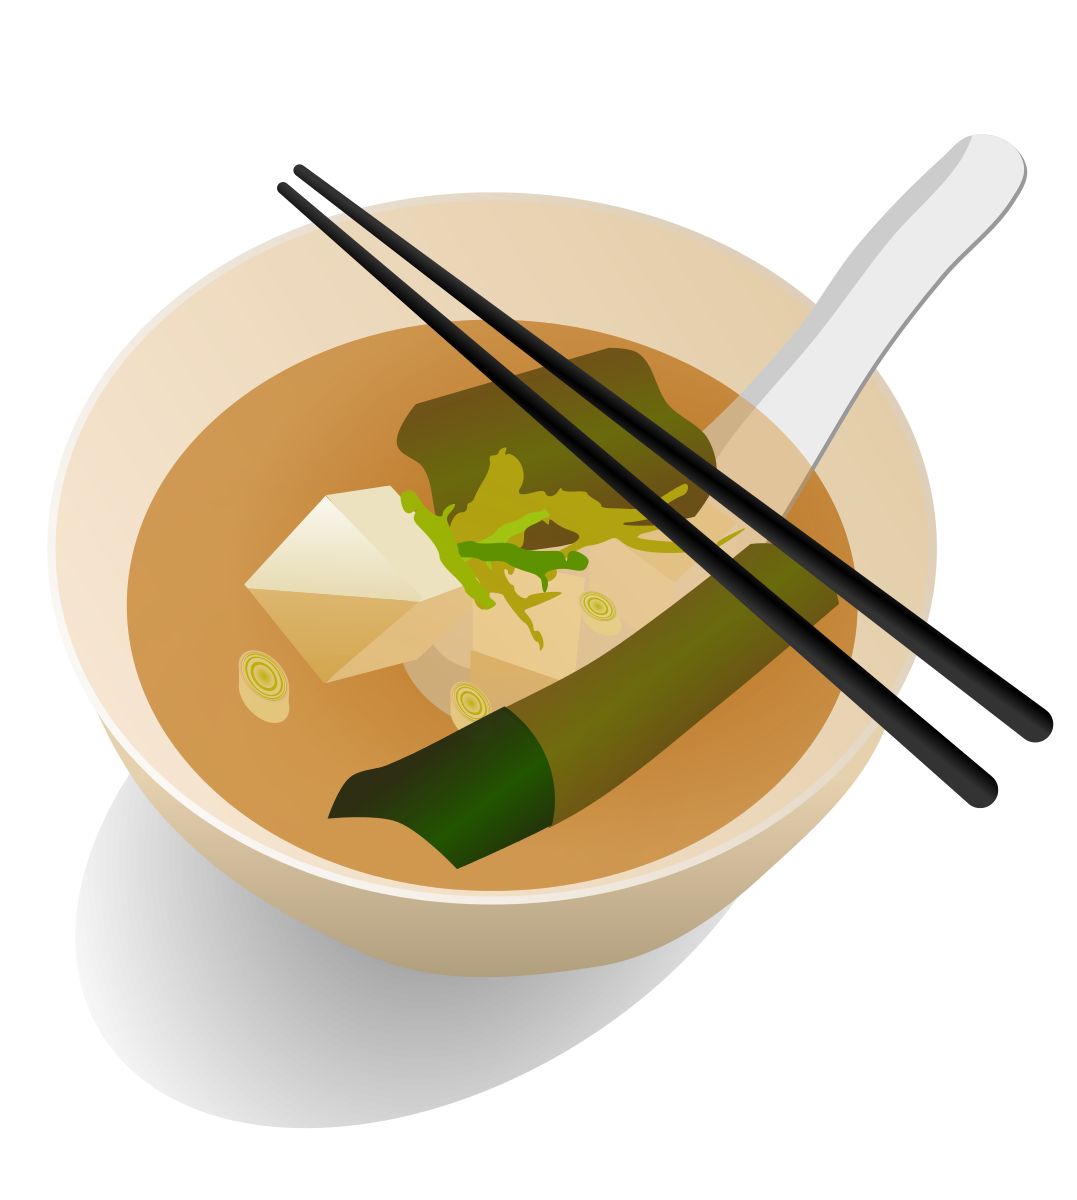 Miso Soup Clipart by gnokii : Food Cliparts #9250- ClipartSE